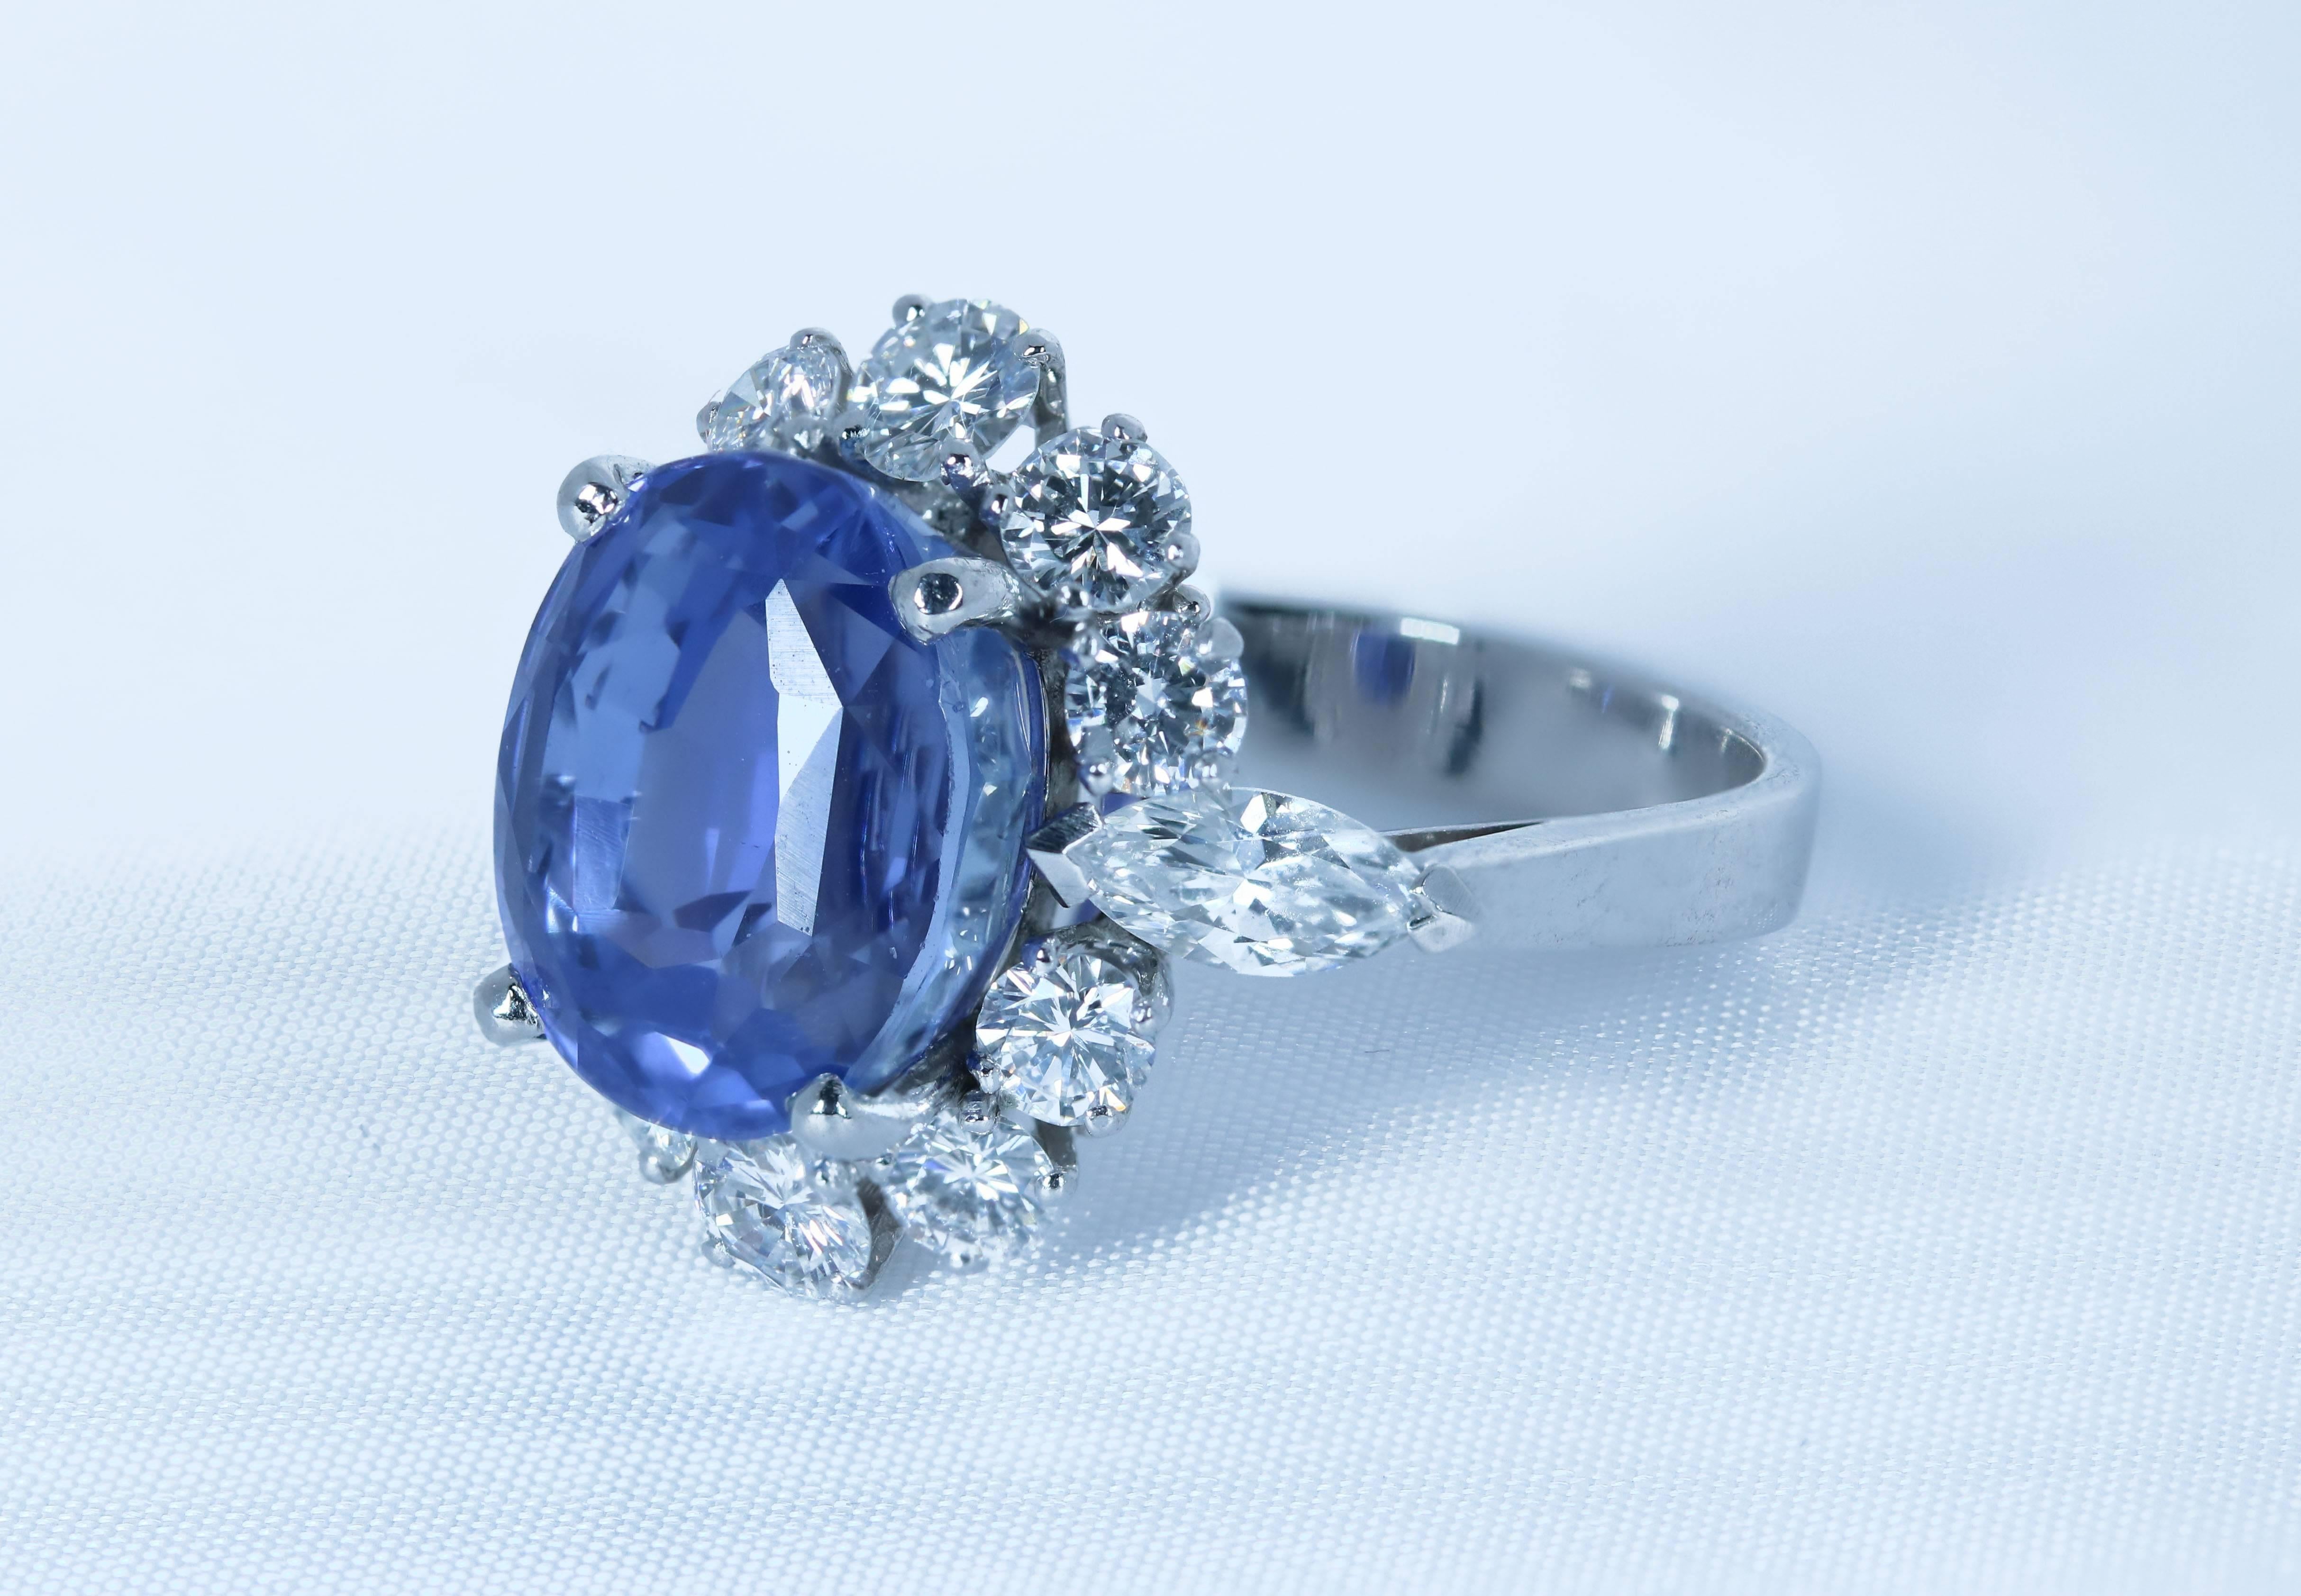 18K white gold oval Ceylon sapphire 9.19 carats surrounded by 12 diamonds weighing approximately 2 carats
GIA Certificate #2185327478 “Sri Lanka, No Indications of Heating”
